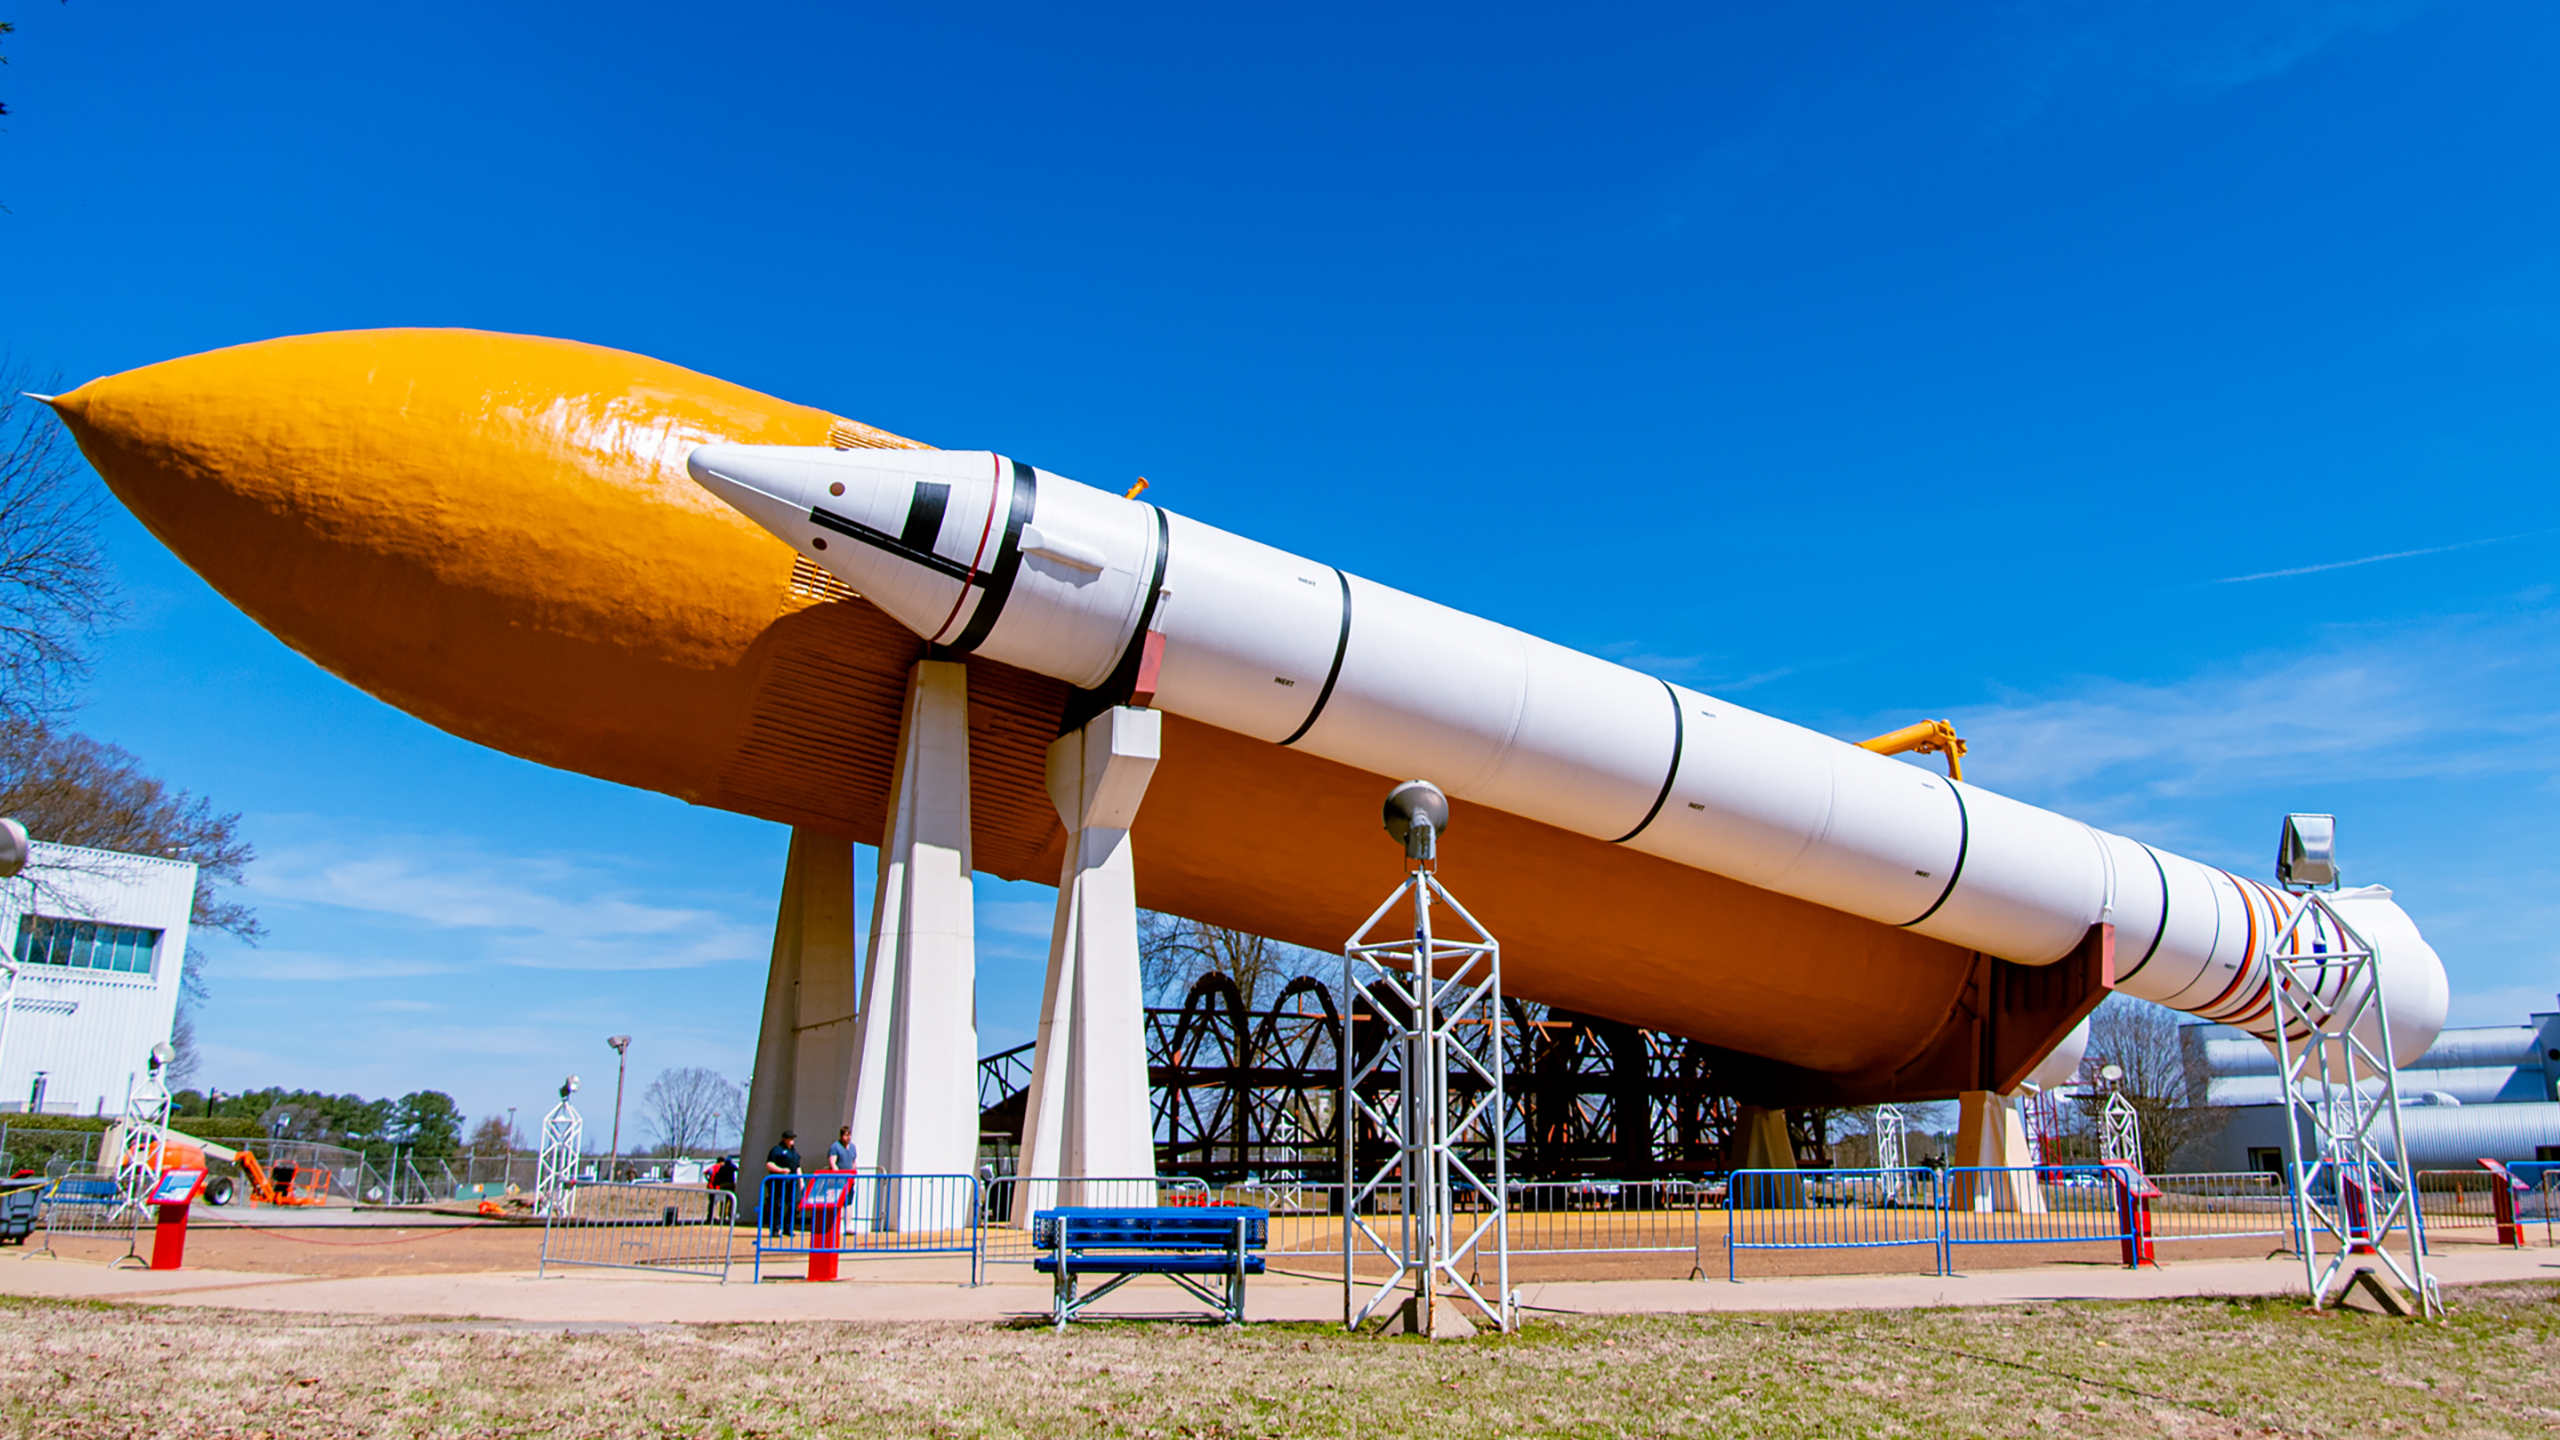 Space Shuttle Pathfinder is almost back. The solid rocket boosters and external tank have been restored with new paint.